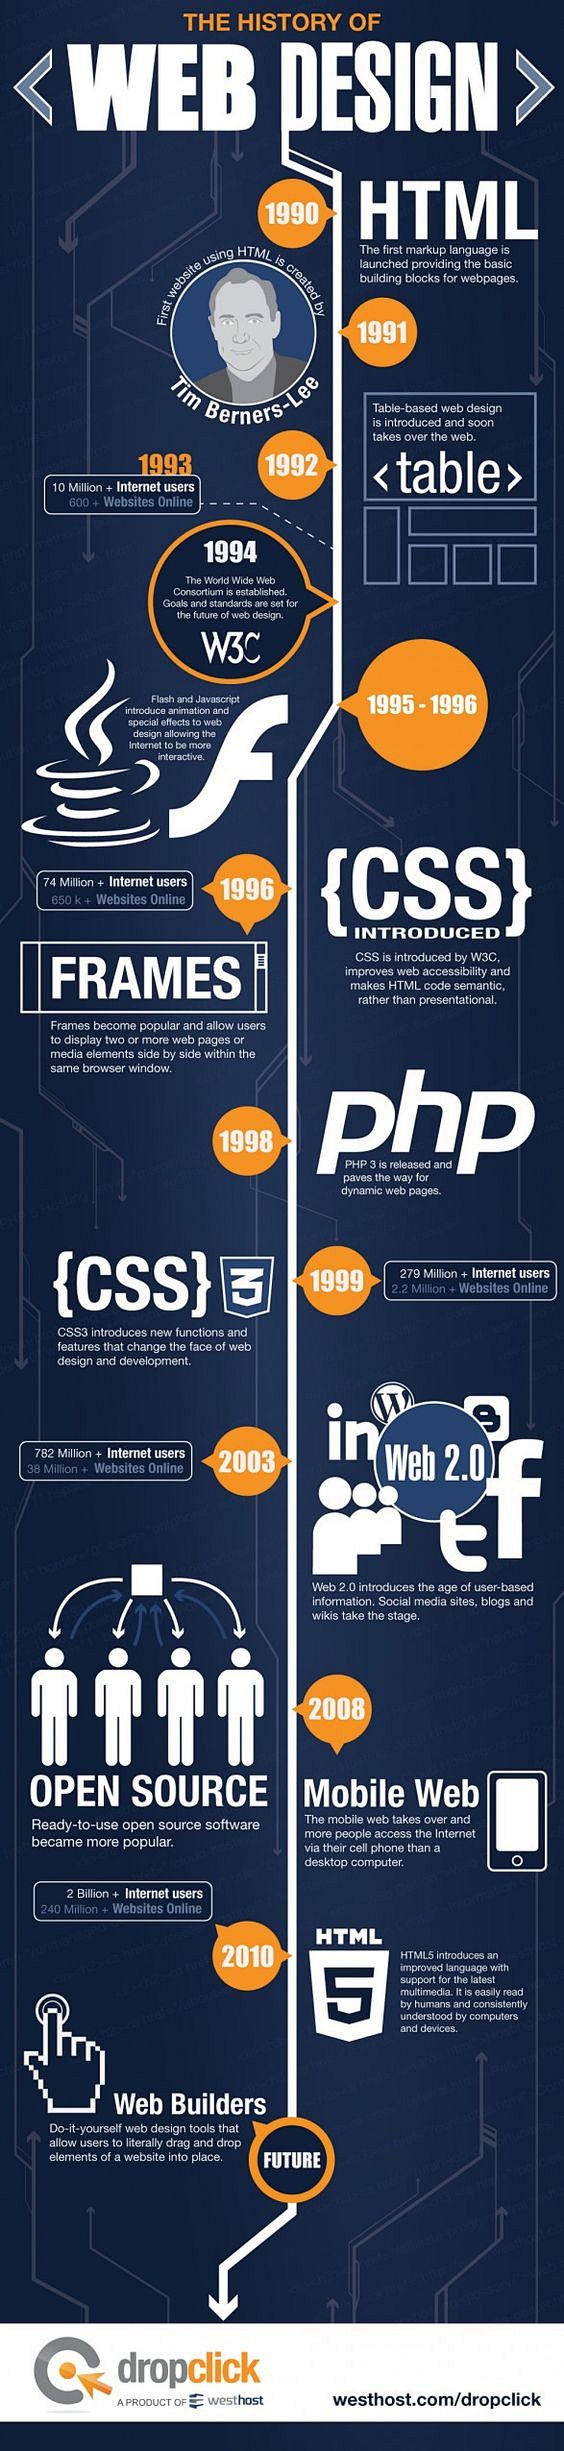 The History of Web D...